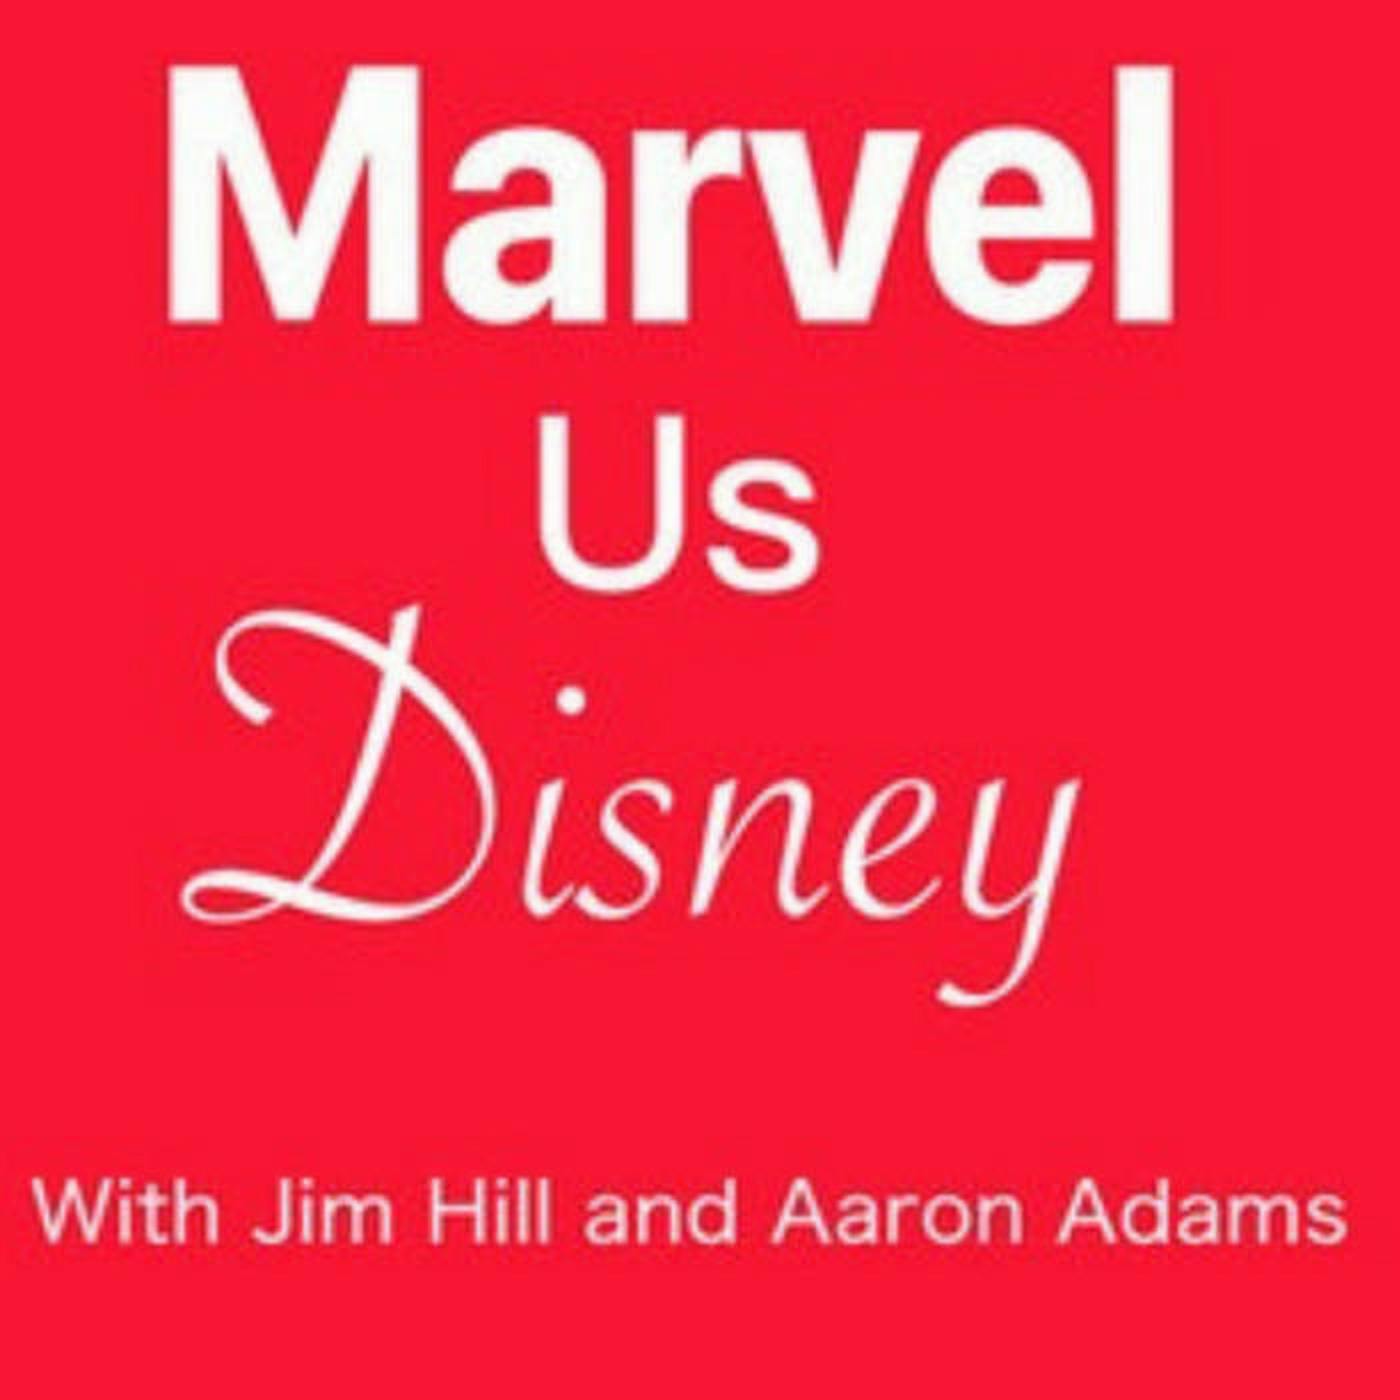 Marvel Us Disney Episode 155: How the MCU’s Phase 4 helped set up Phases 5 & 6